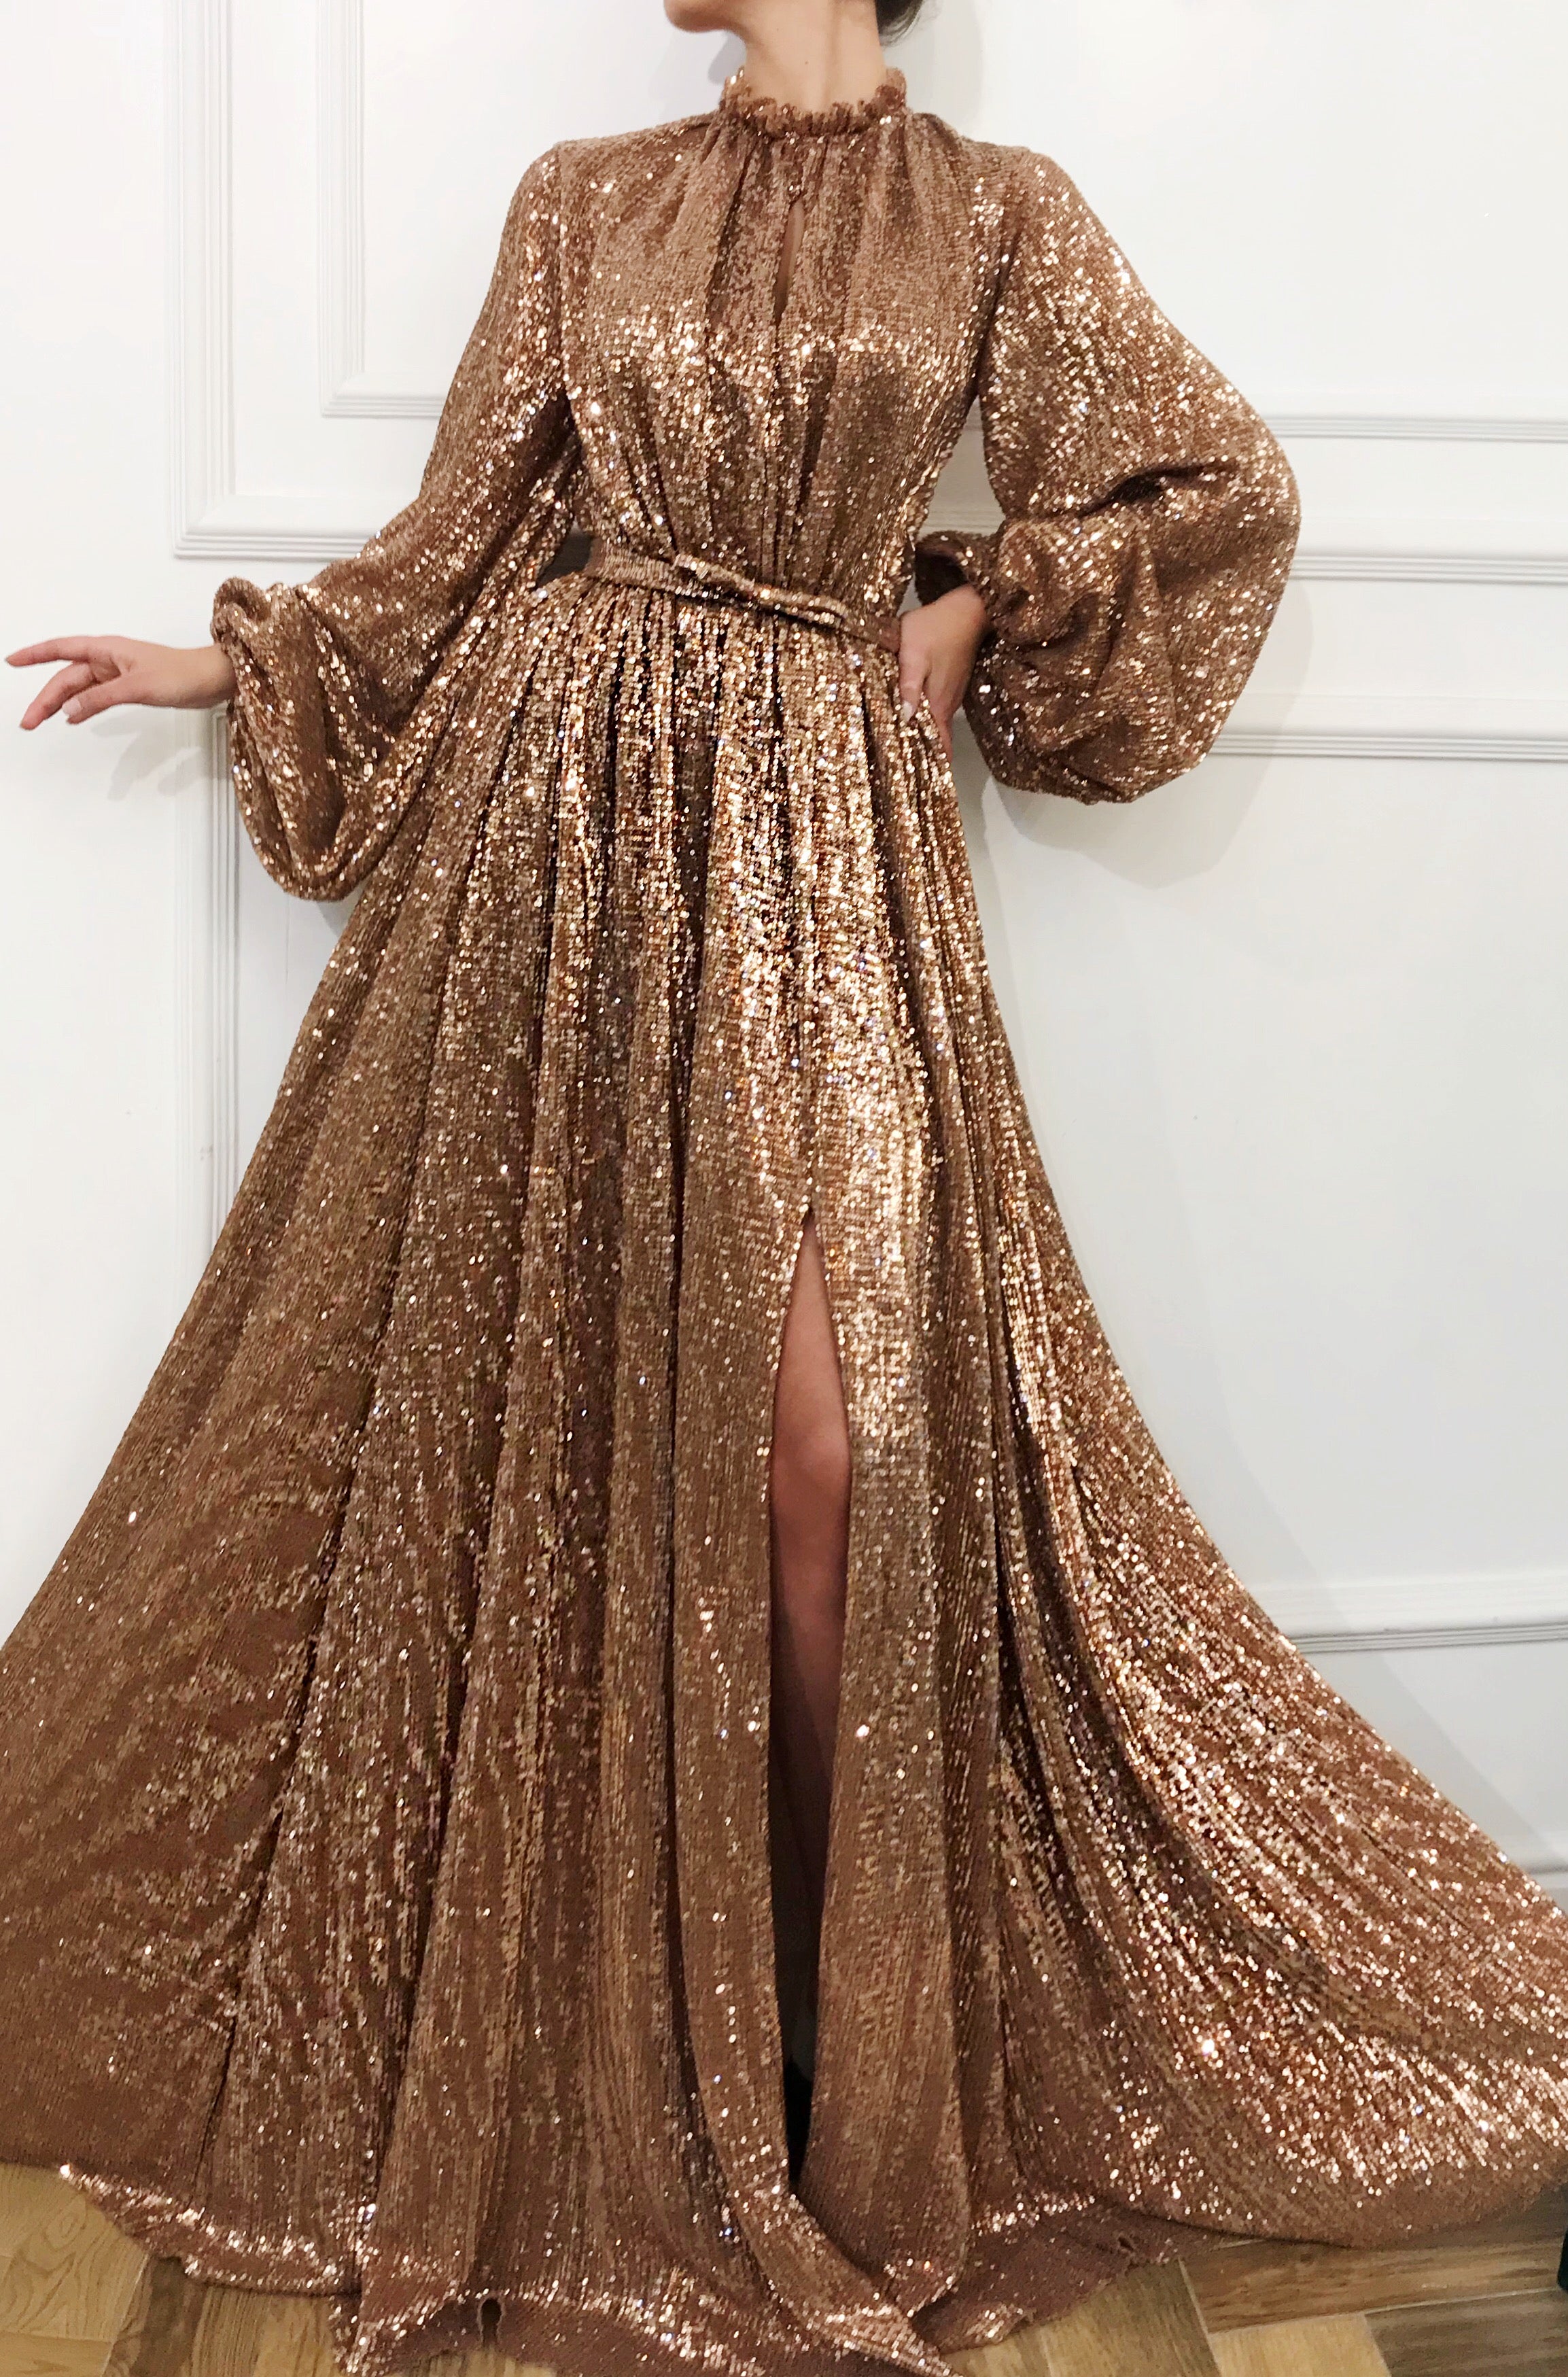 Brown sheath dress with long sleeves and sequins